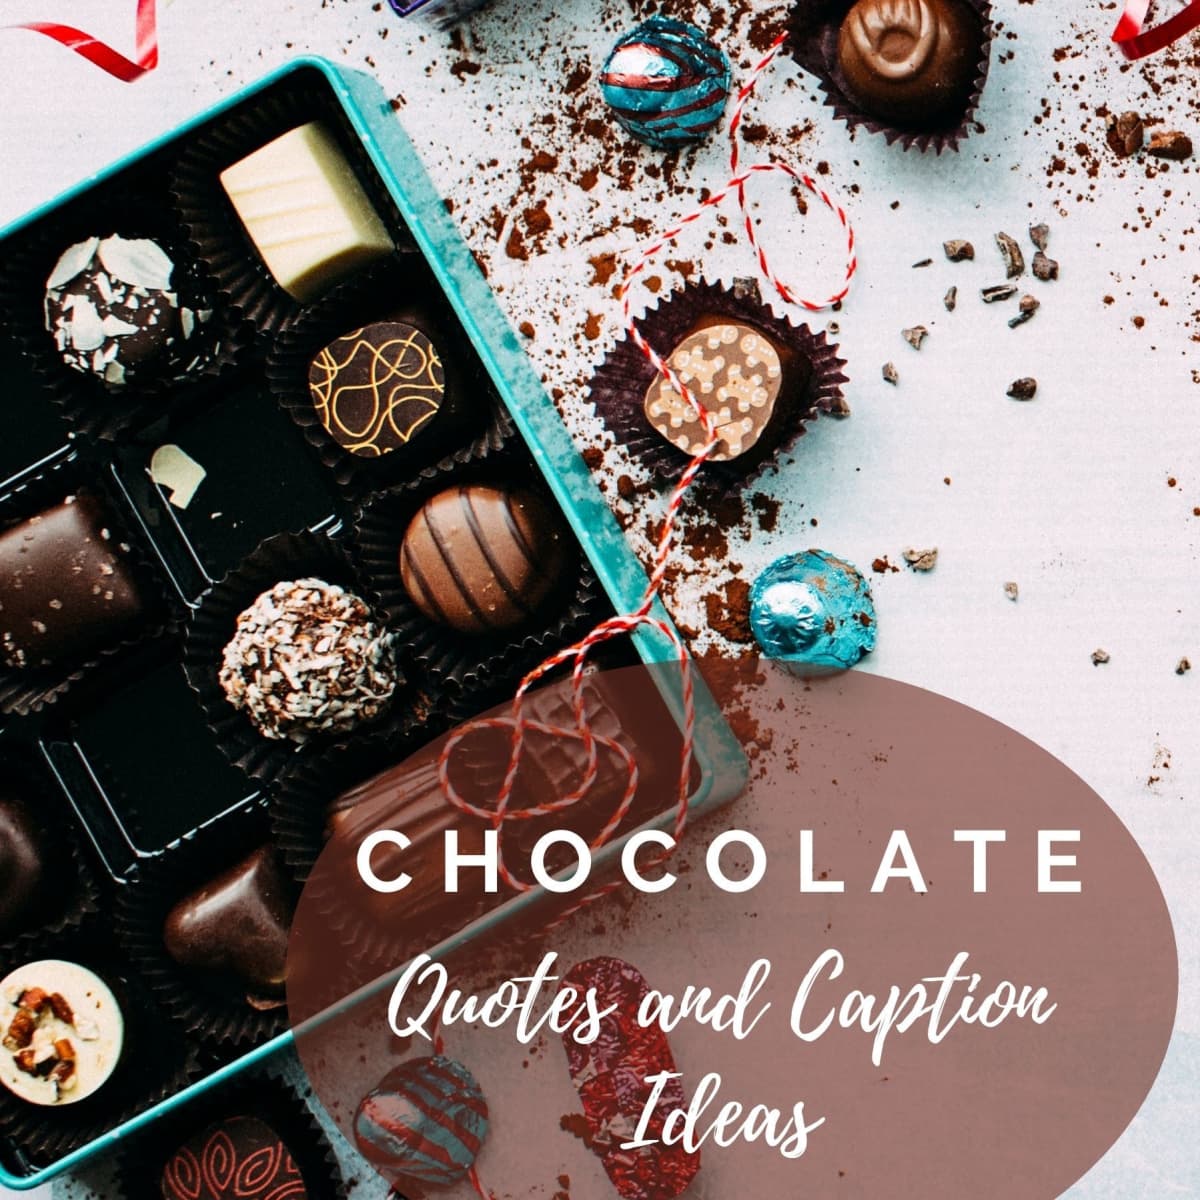 chocolate quotes and caption ideas